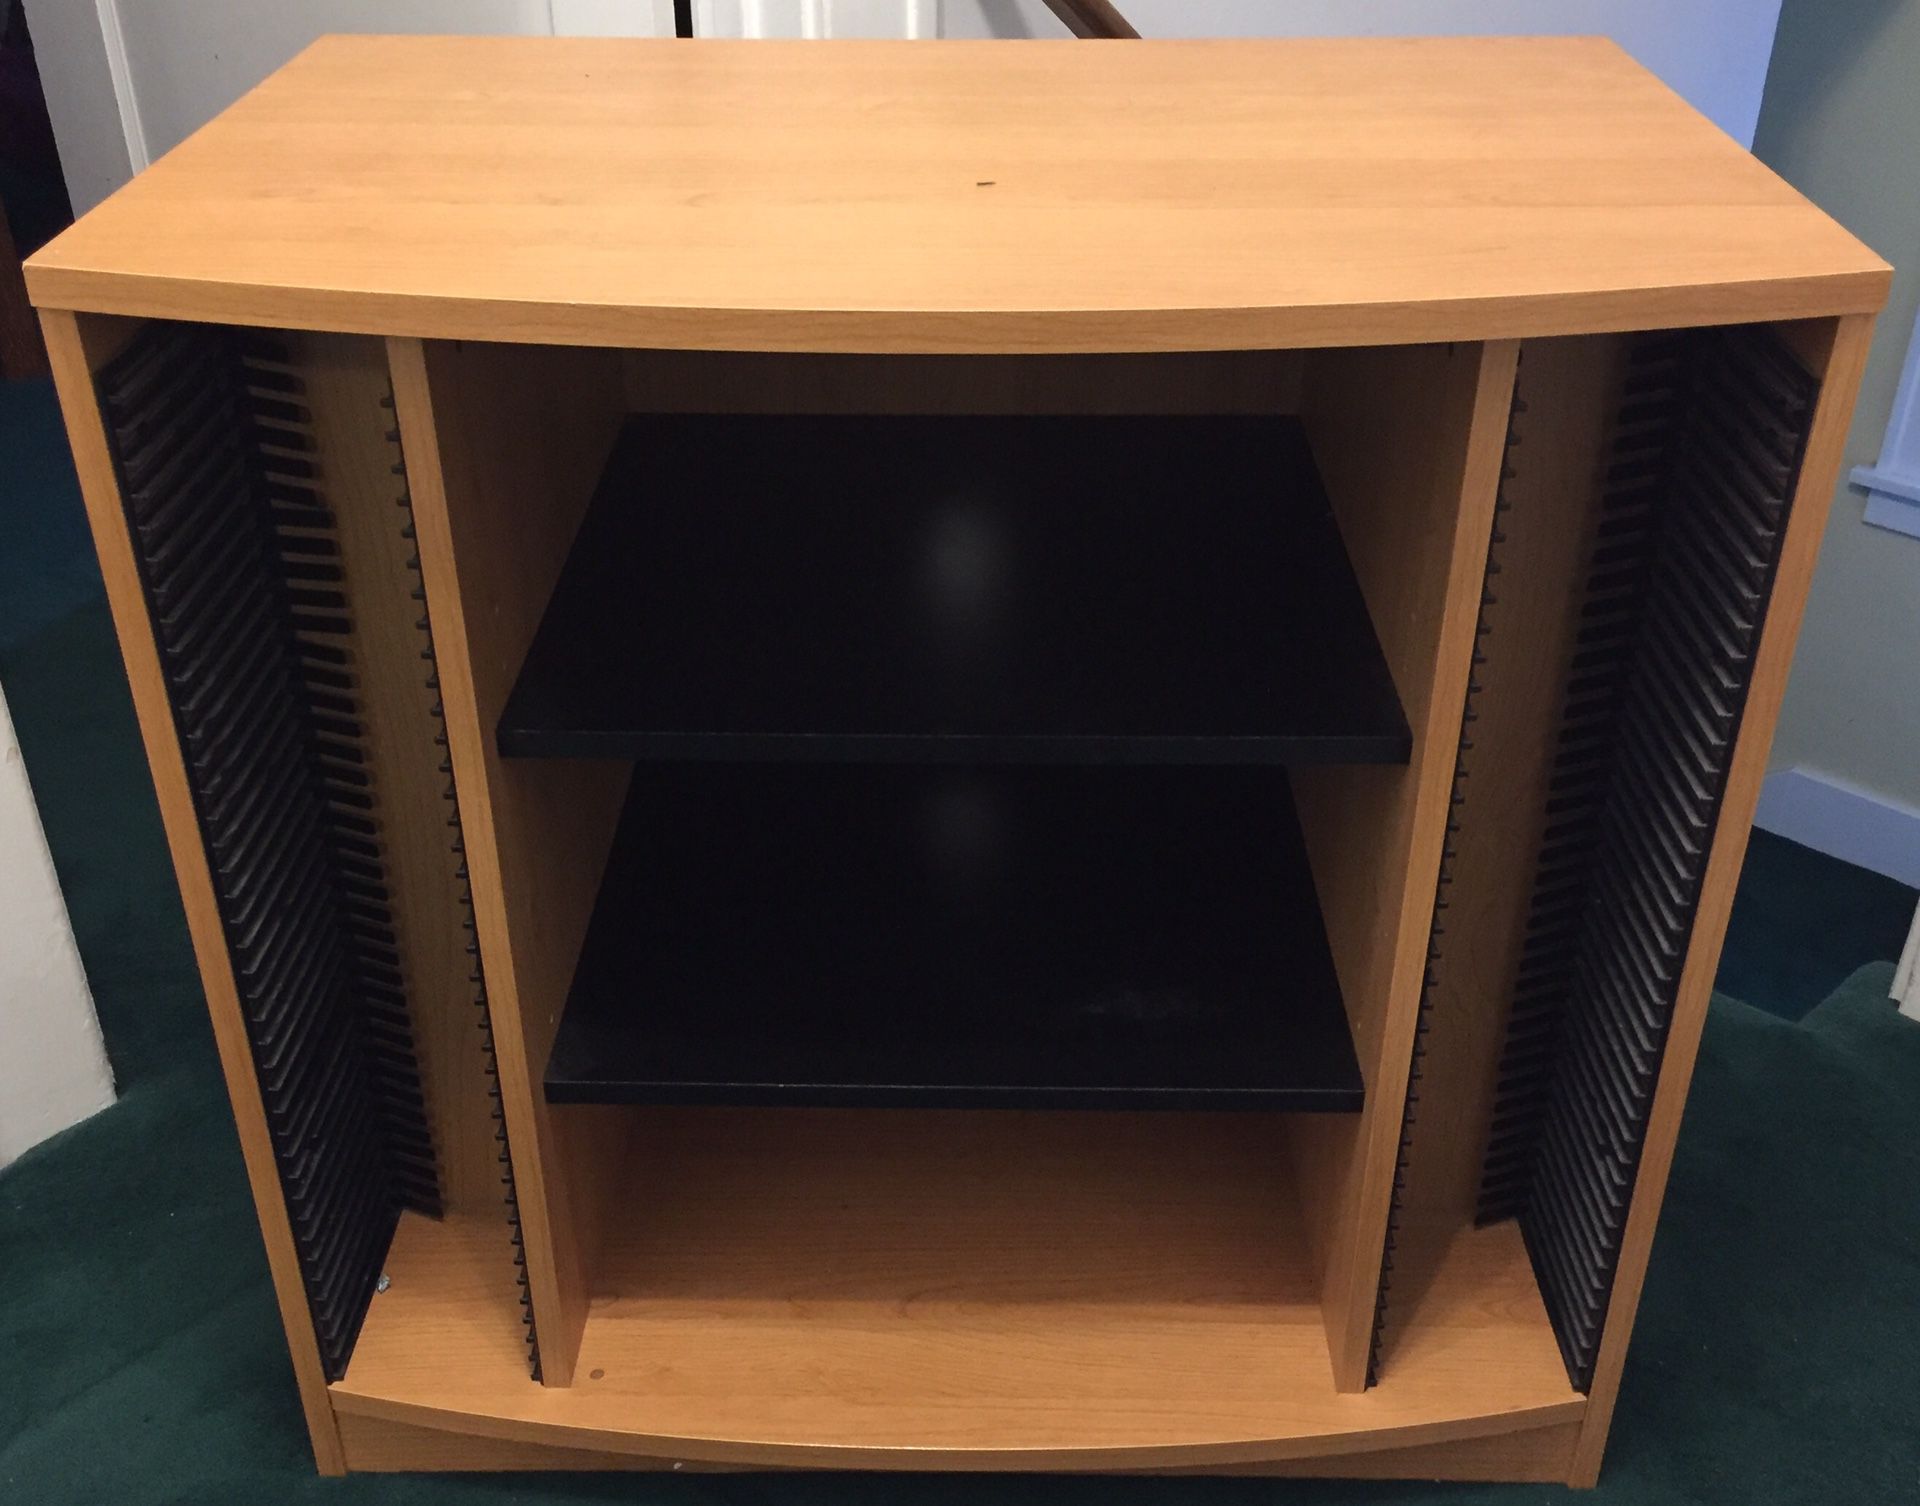 Free Entertainment Center with adjustable shelves and lots of slotted space for DVDs, CDs, and other storage